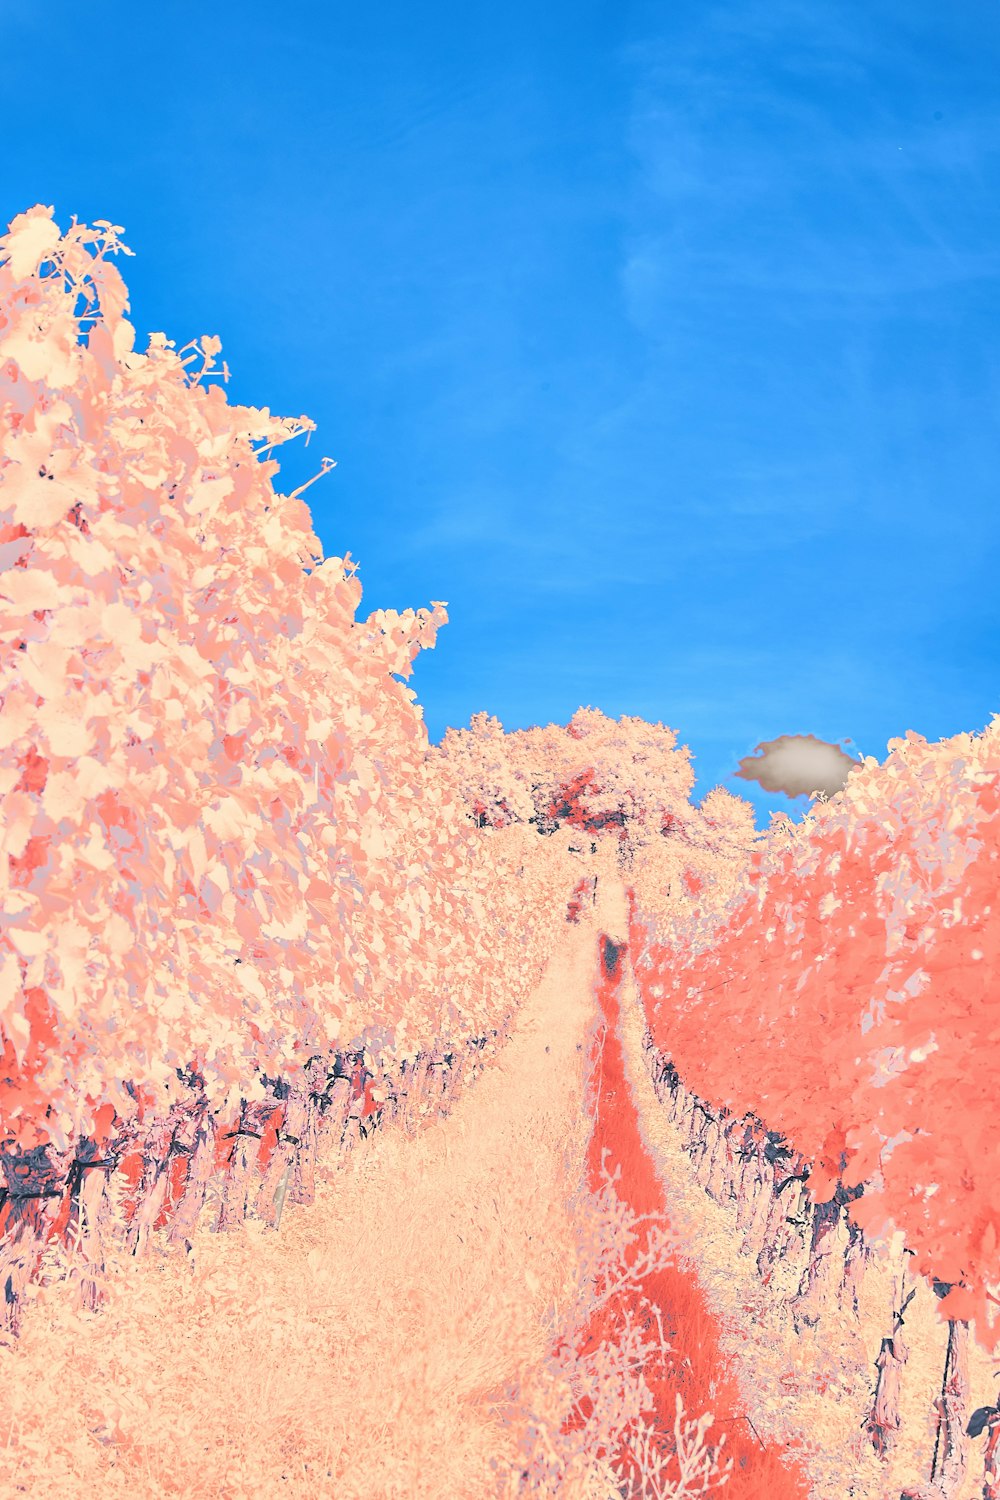 a painting of a dirt road surrounded by trees